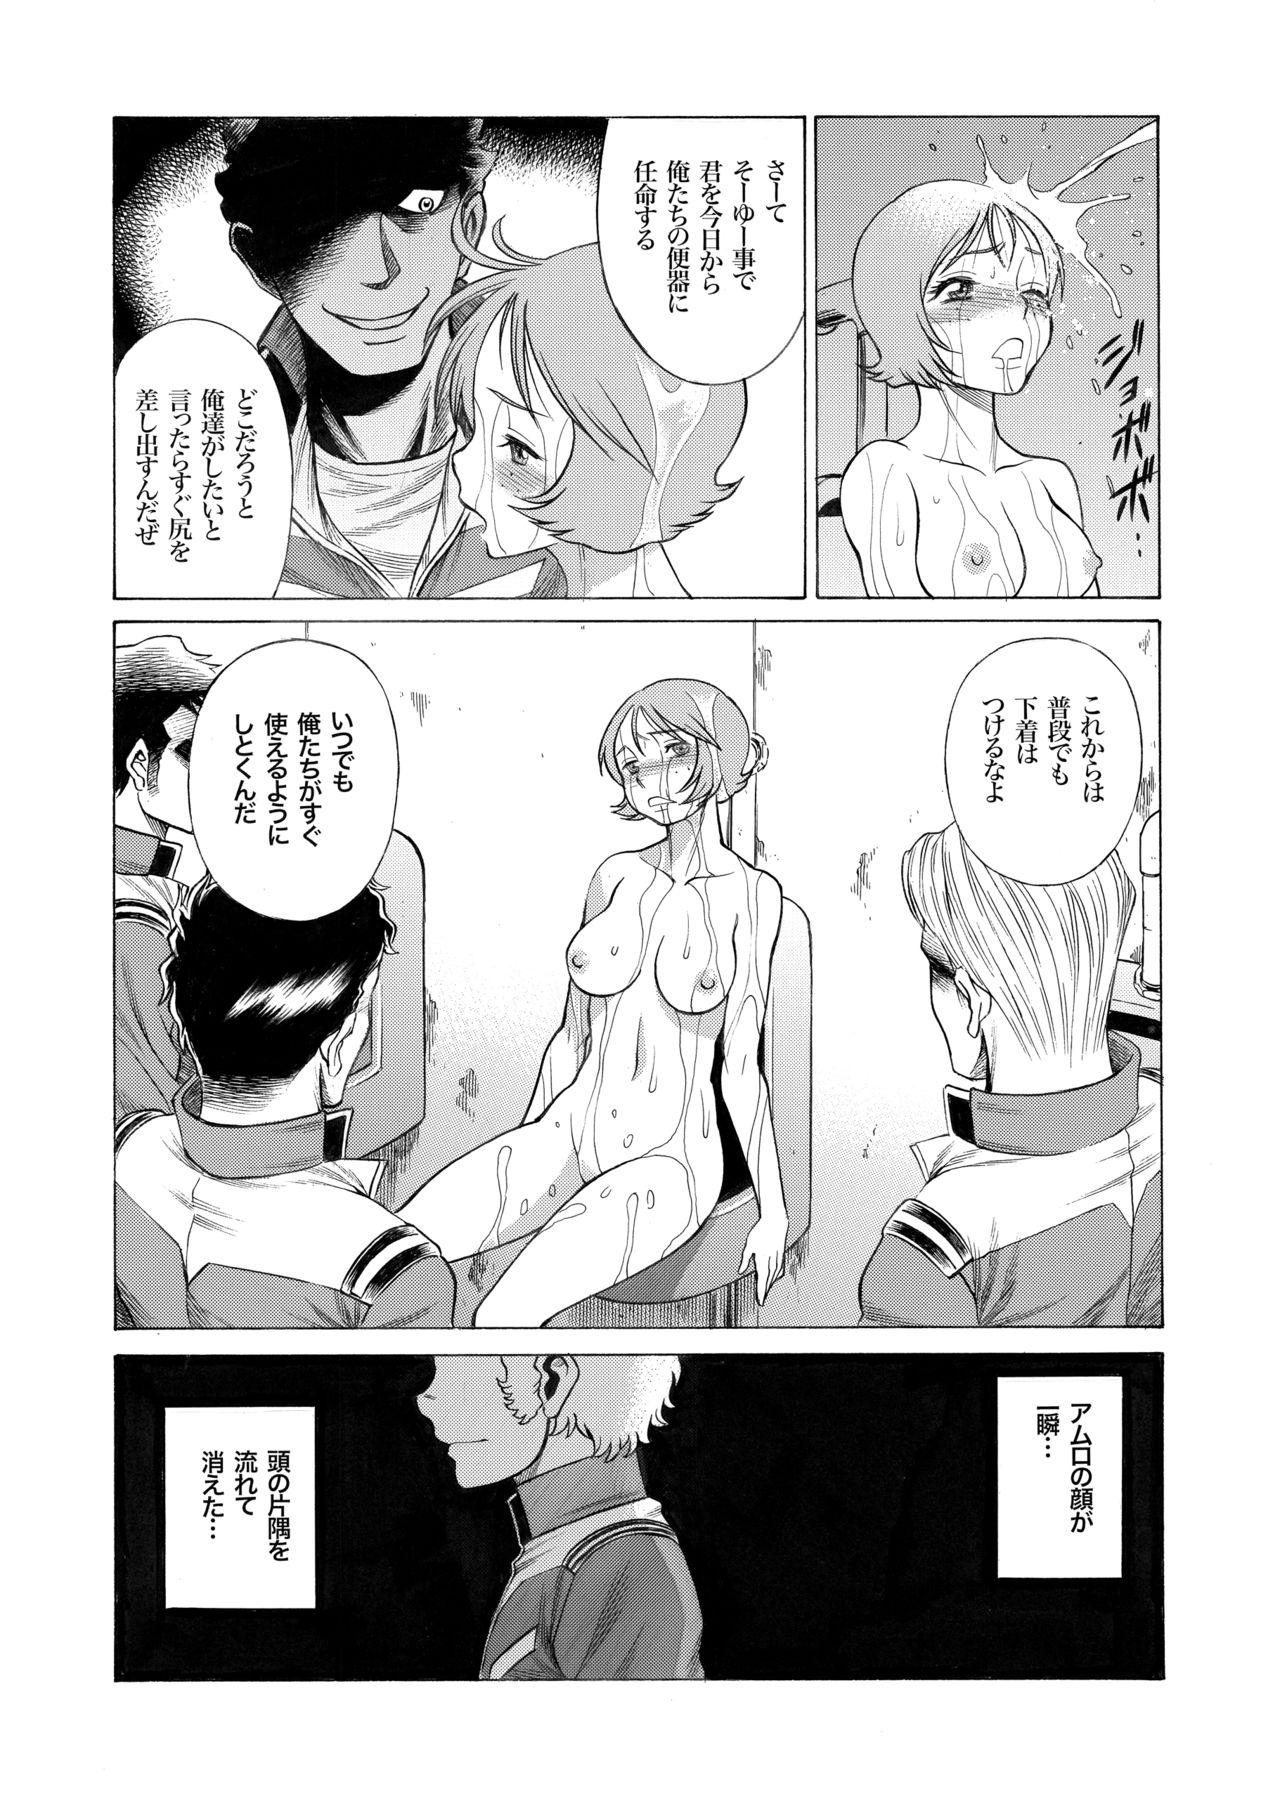 Porn Reijoh - Mobile suit gundam Gayemo - Page 7